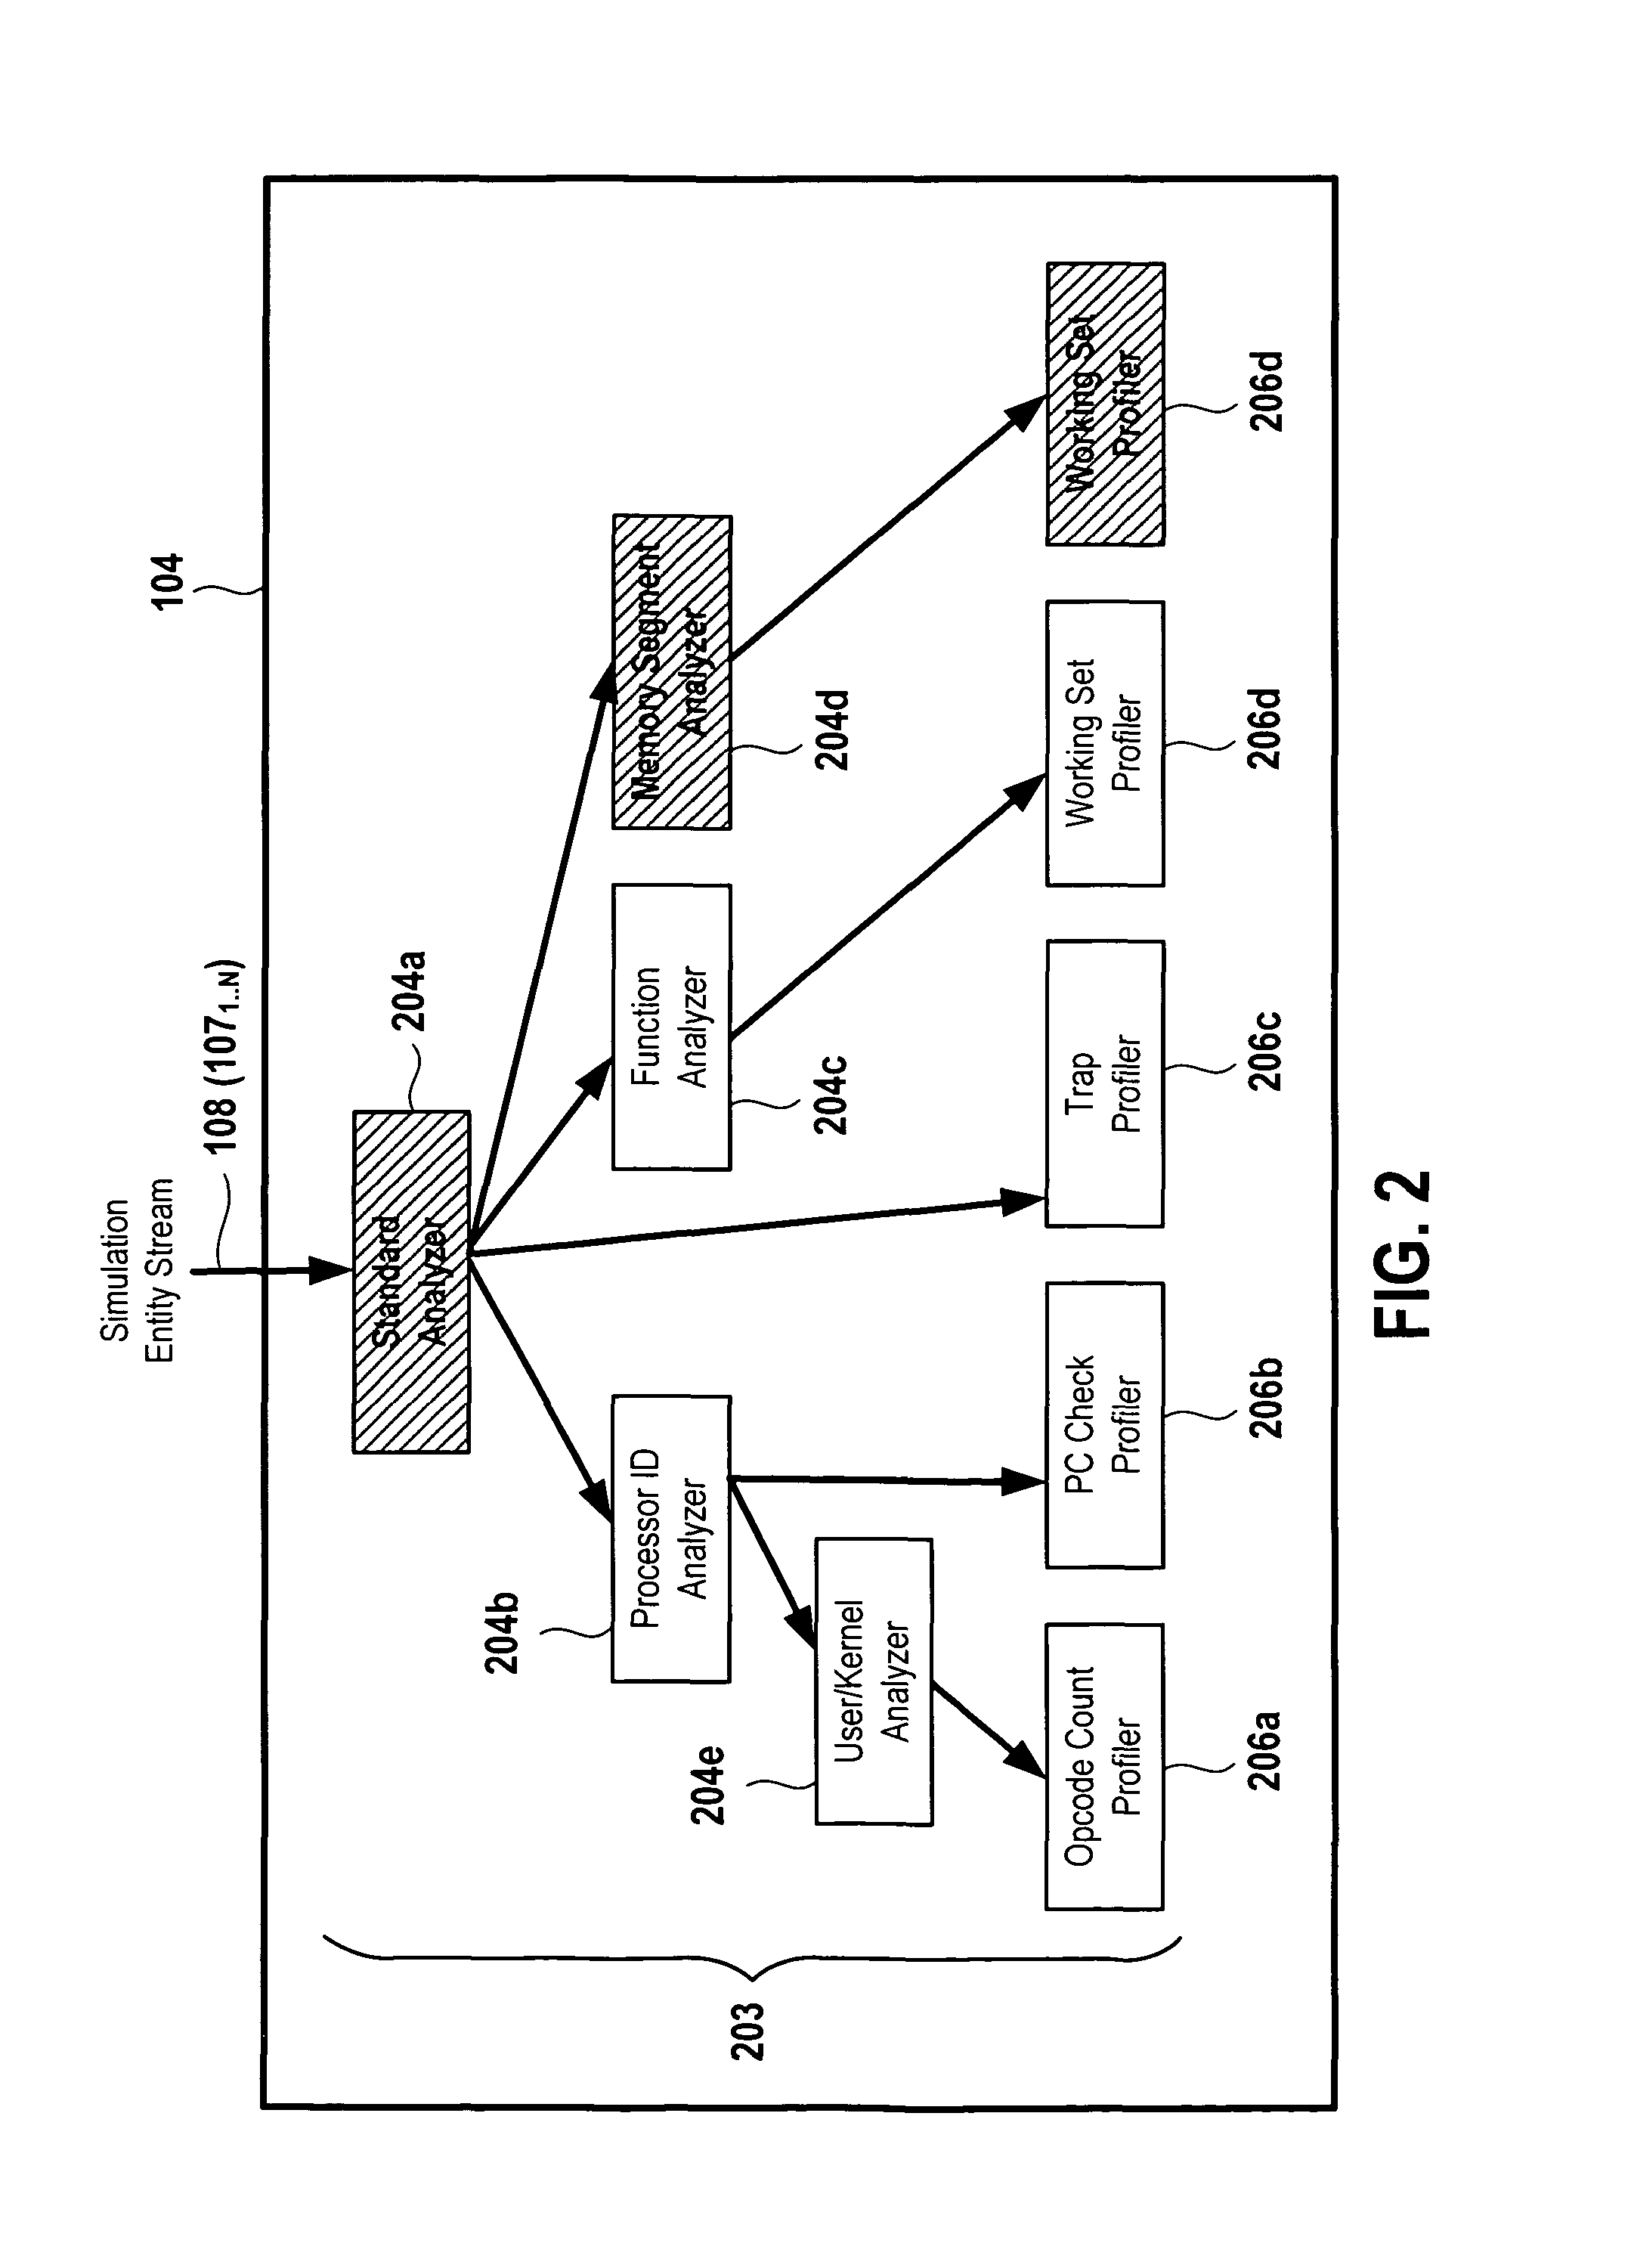 System for application level analysis of hardware simulations